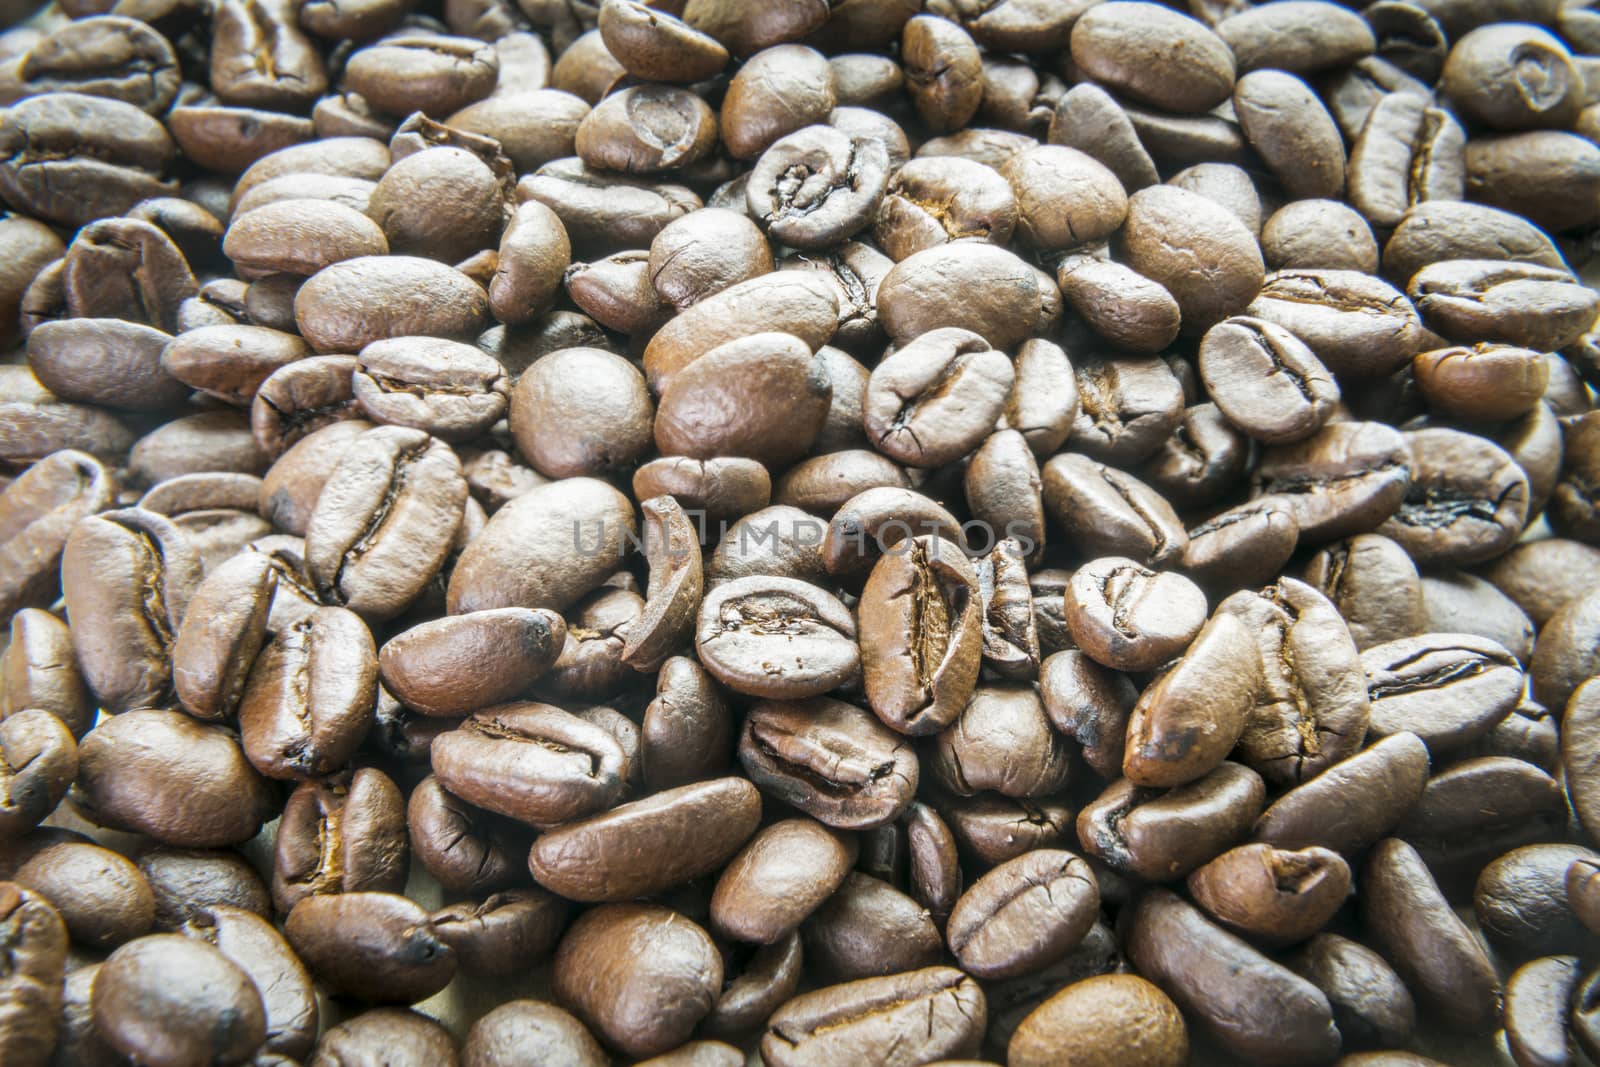 Closeup of roasted coffee beans